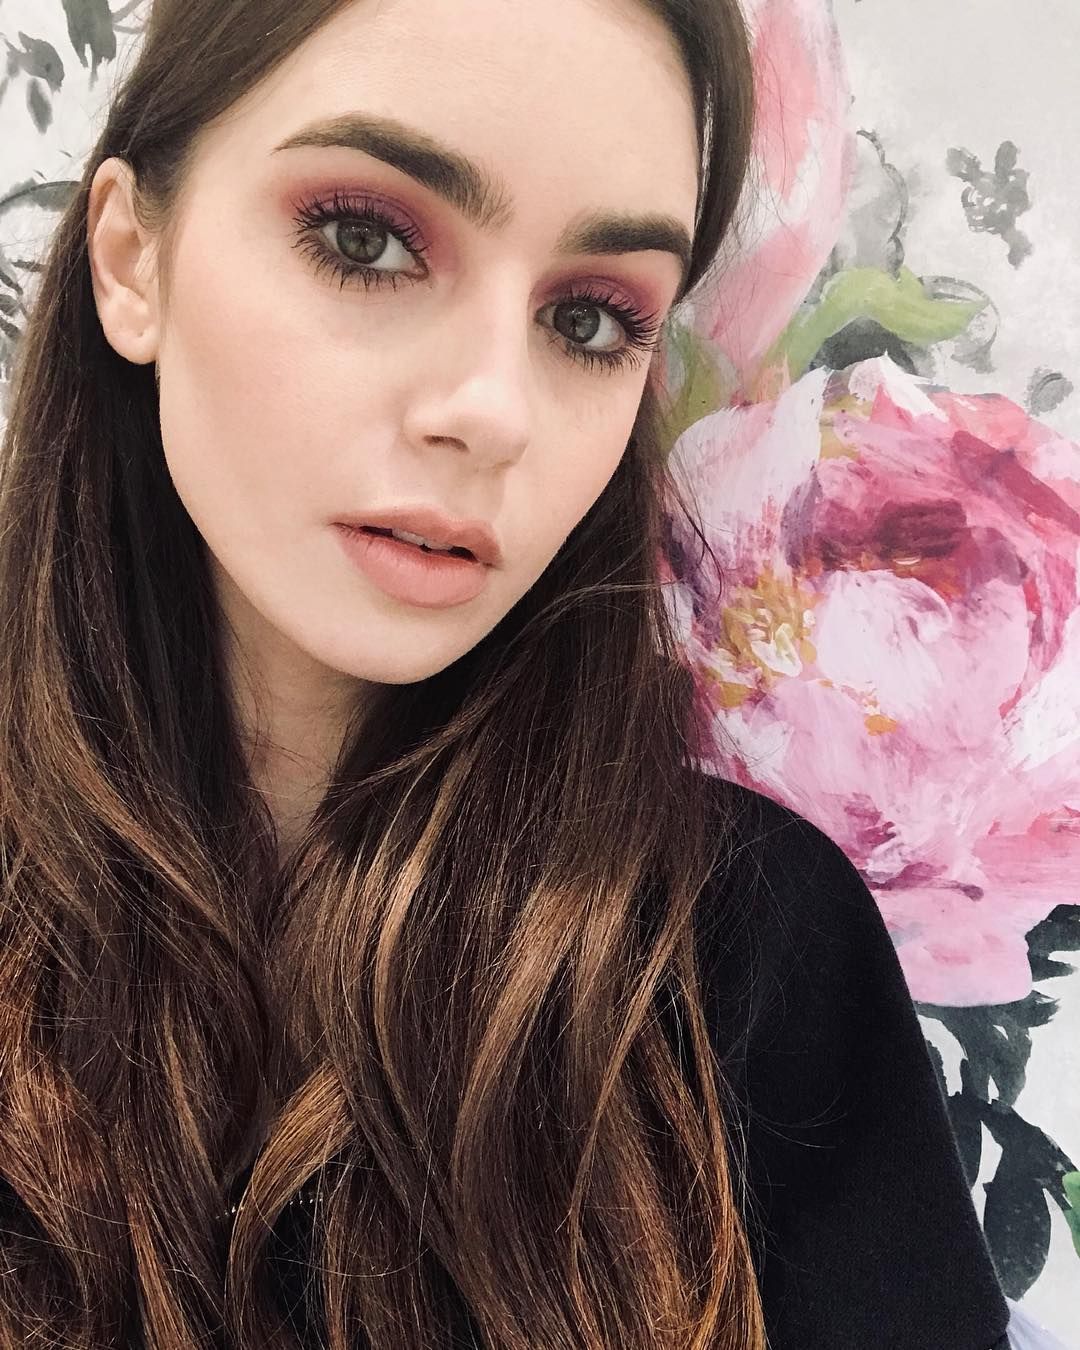 Lily Collins Cute British Actress Wallpapers